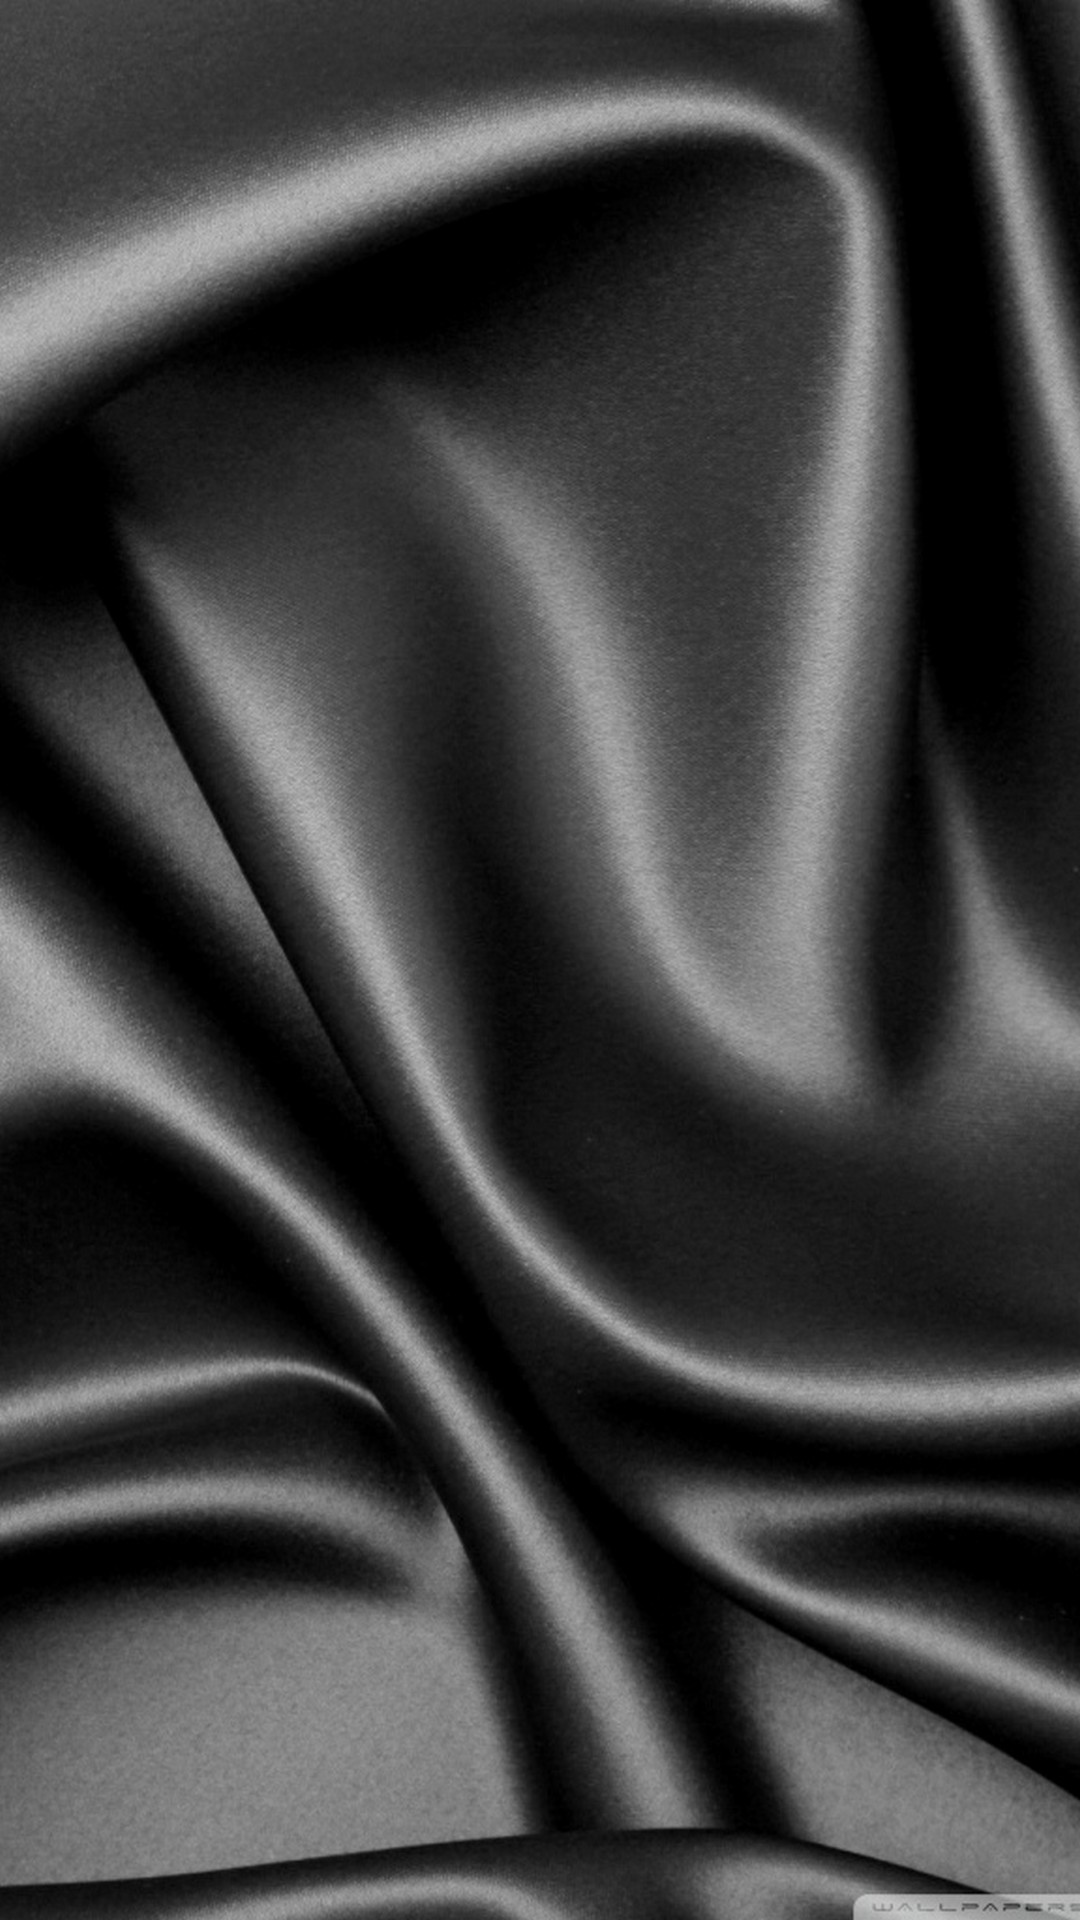 Wallpapers Phone Black Silk with high-resolution 1080x1920 pixel. You can use this wallpaper for your Android backgrounds, Tablet, Samsung Screensavers, Mobile Phone Lock Screen and another Smartphones device